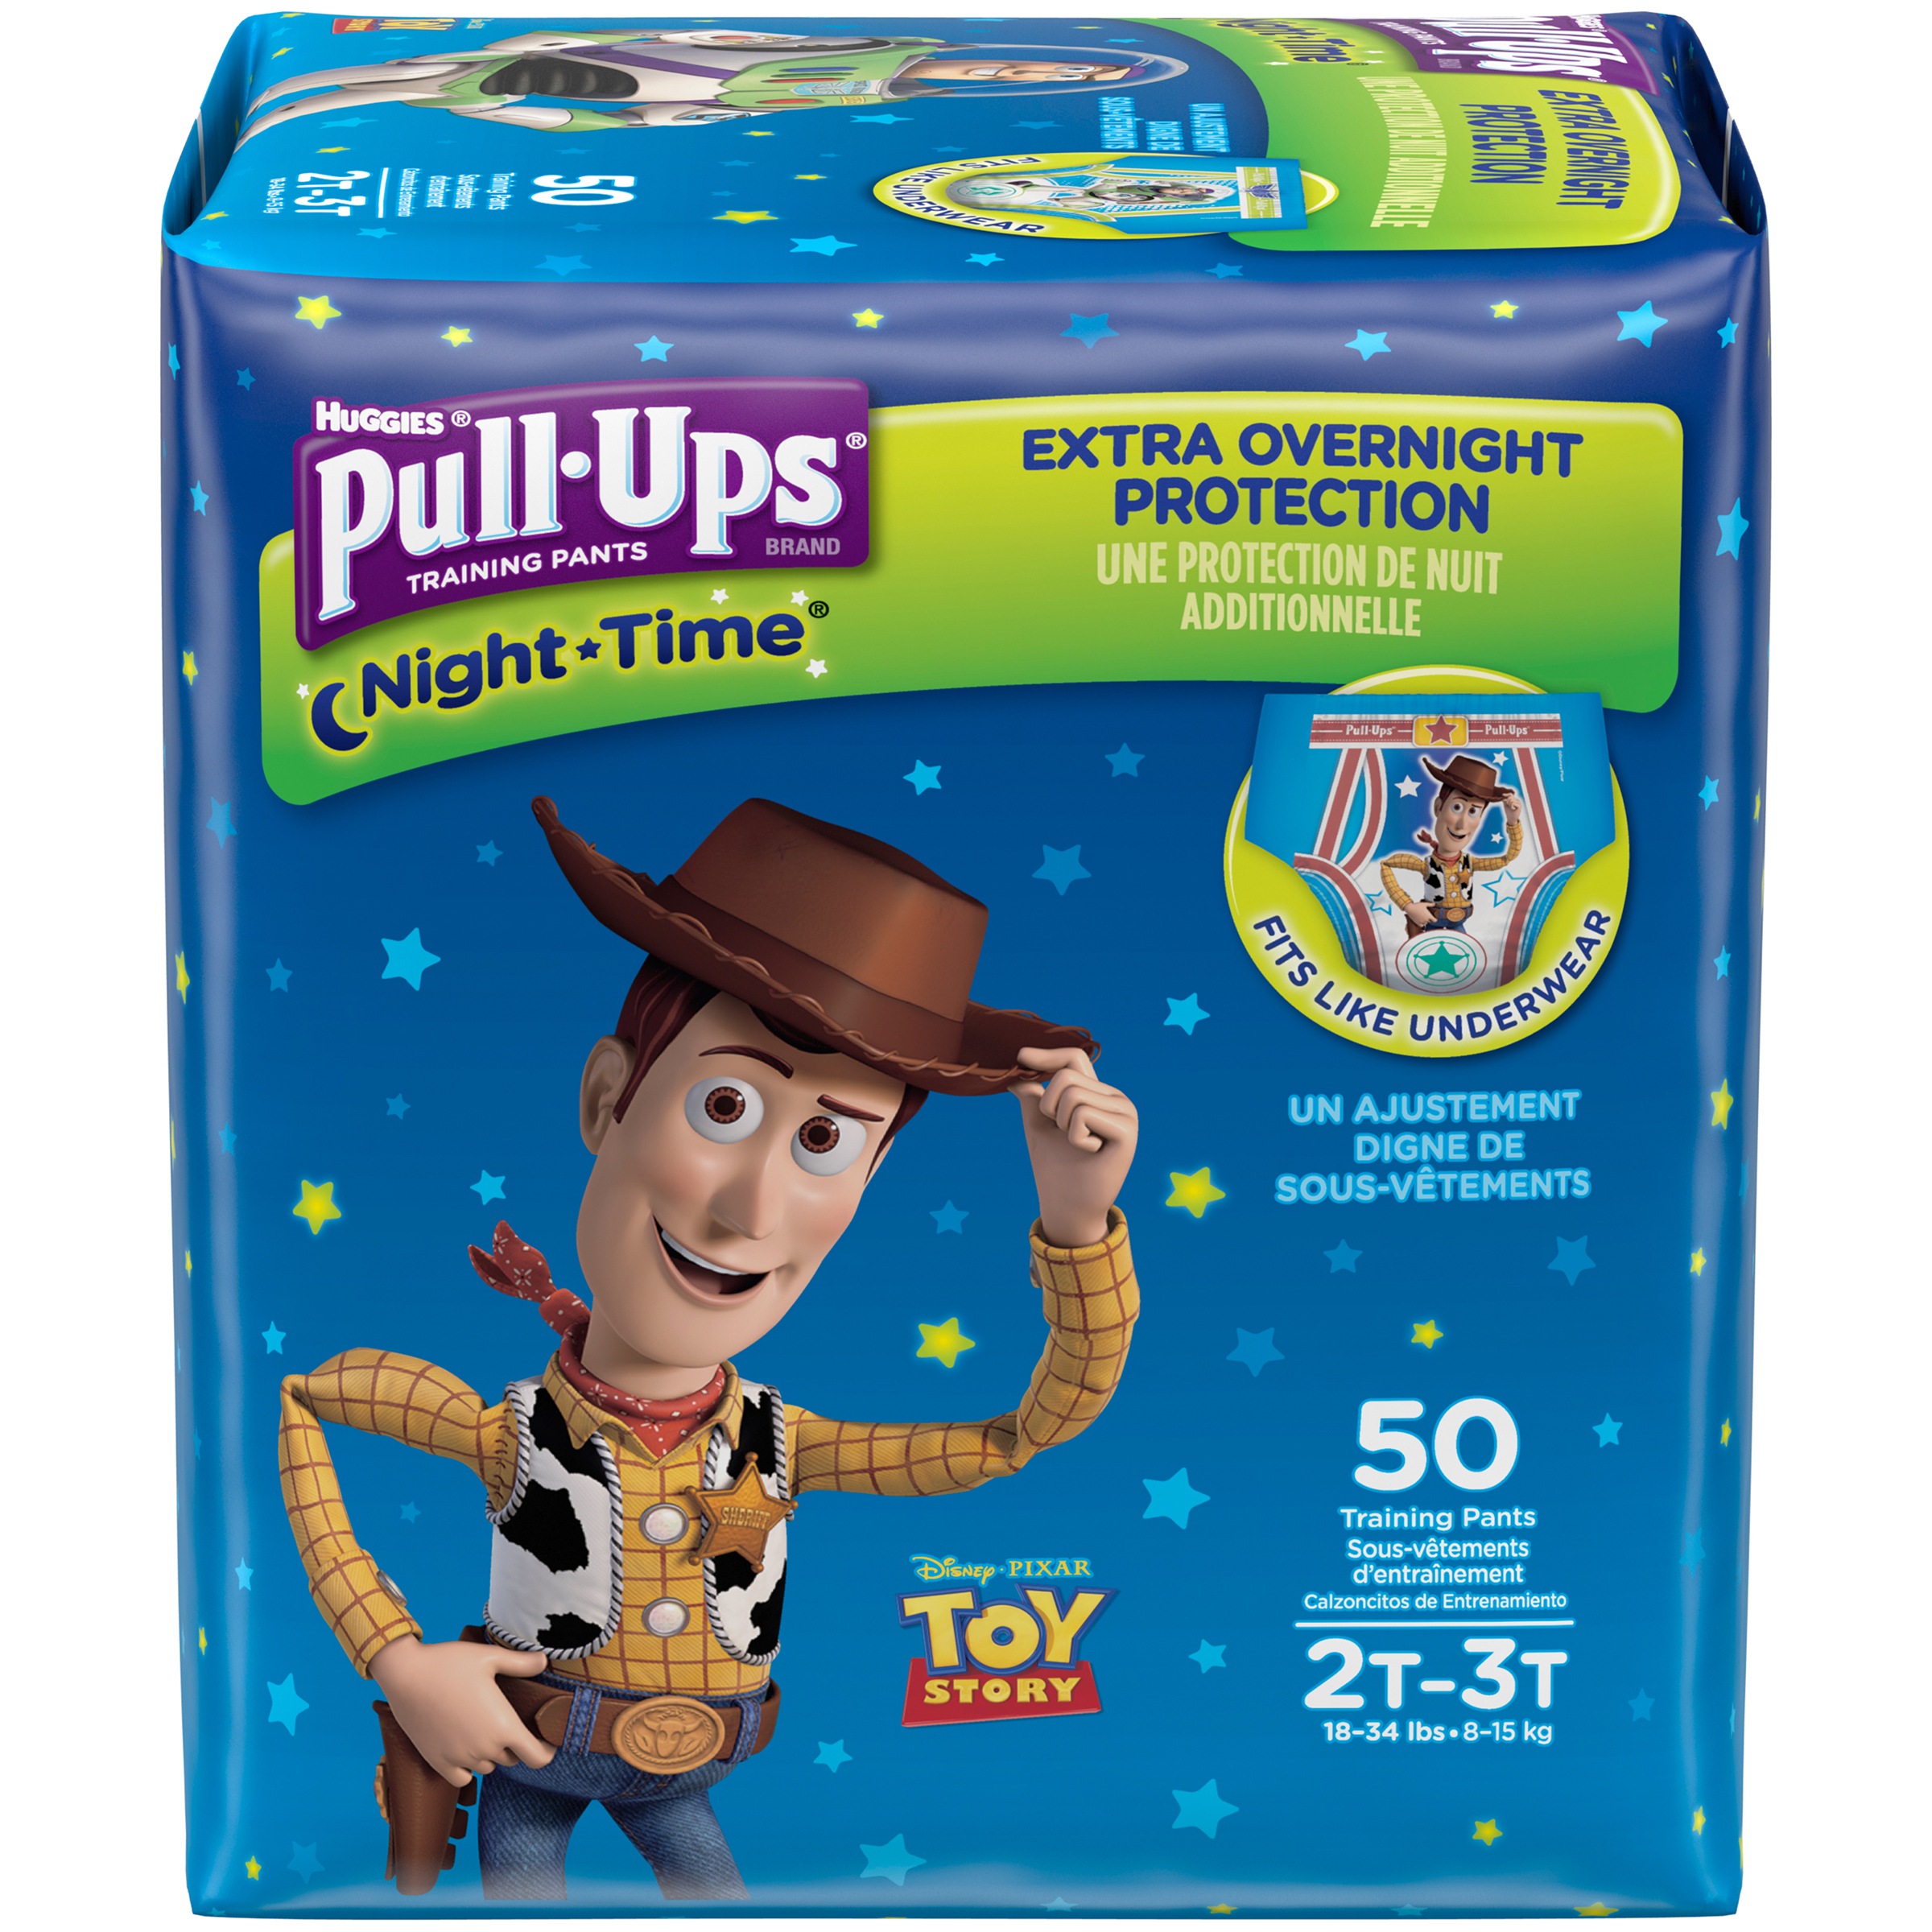 Pull-Ups Training Pants, NightTime for Boys 2T-3T - image 8 of 9